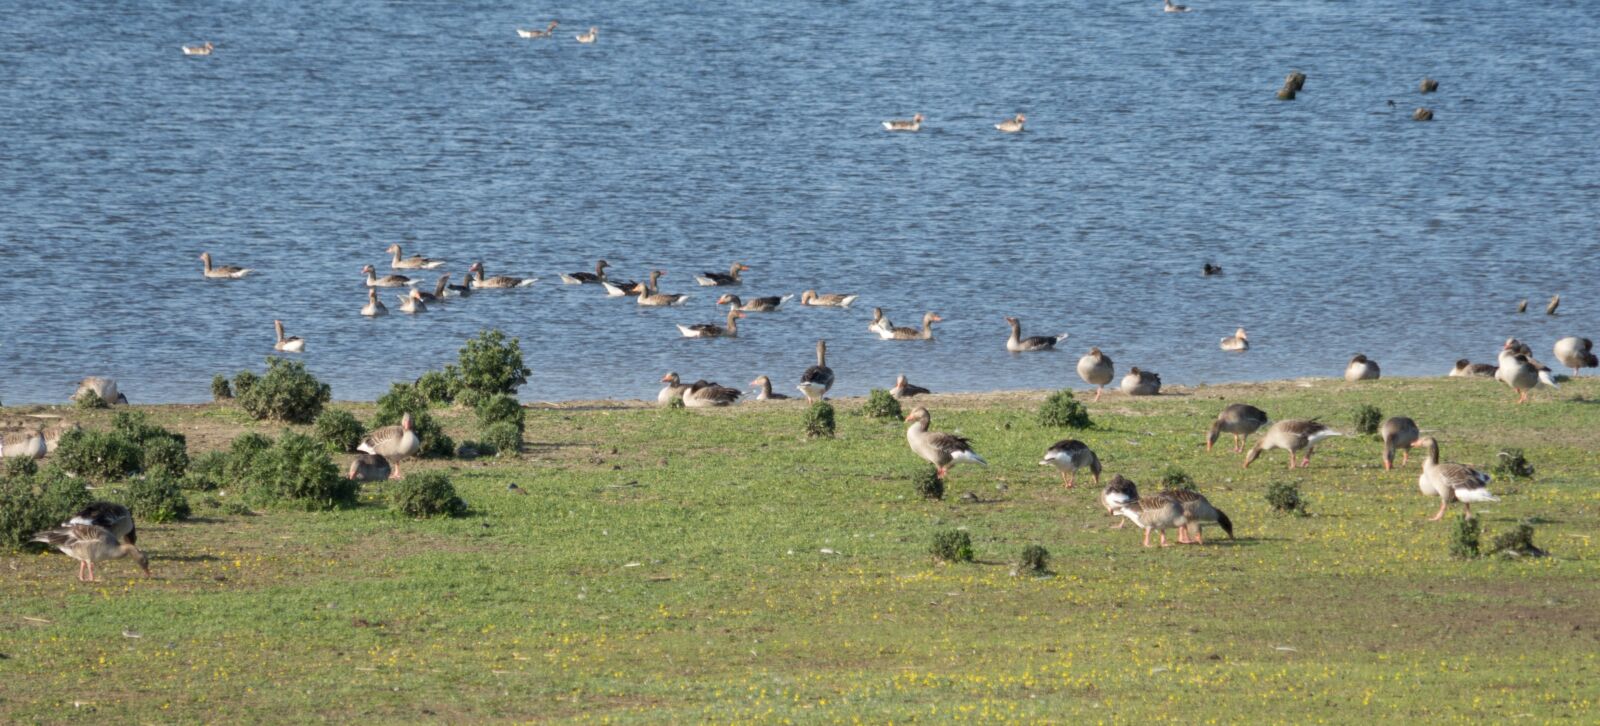 Sony a7 sample photo. Greylag goose, wild geese photography